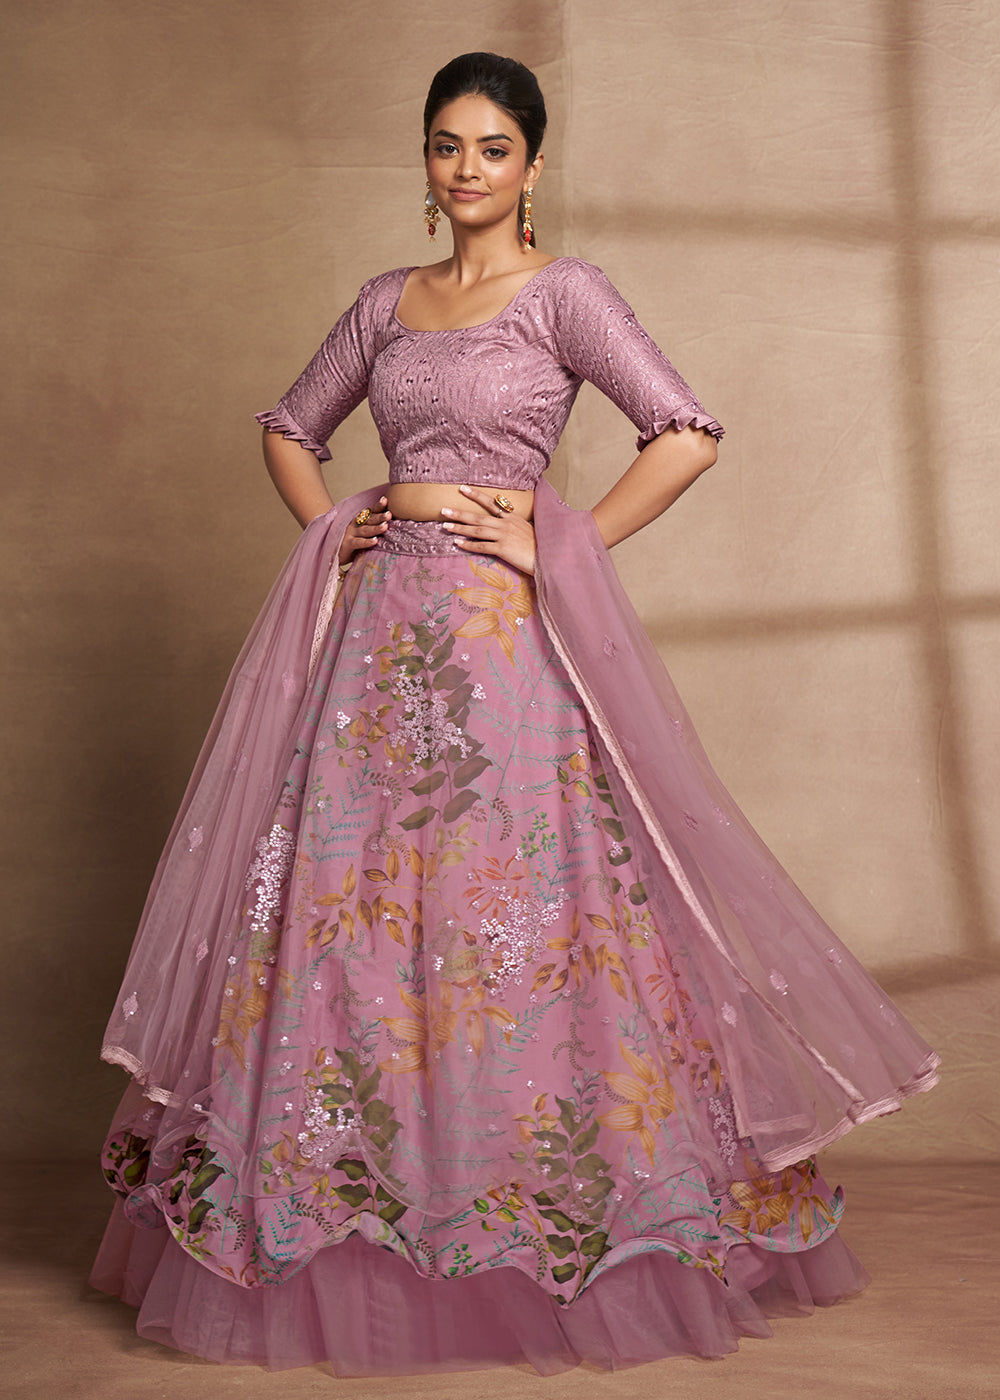 Buy Now Lovely Purple Floral Digital Printed & Embroidered Lehenga Choli Online in USA, UK, Canada & Worldwide at Empress Clothing.